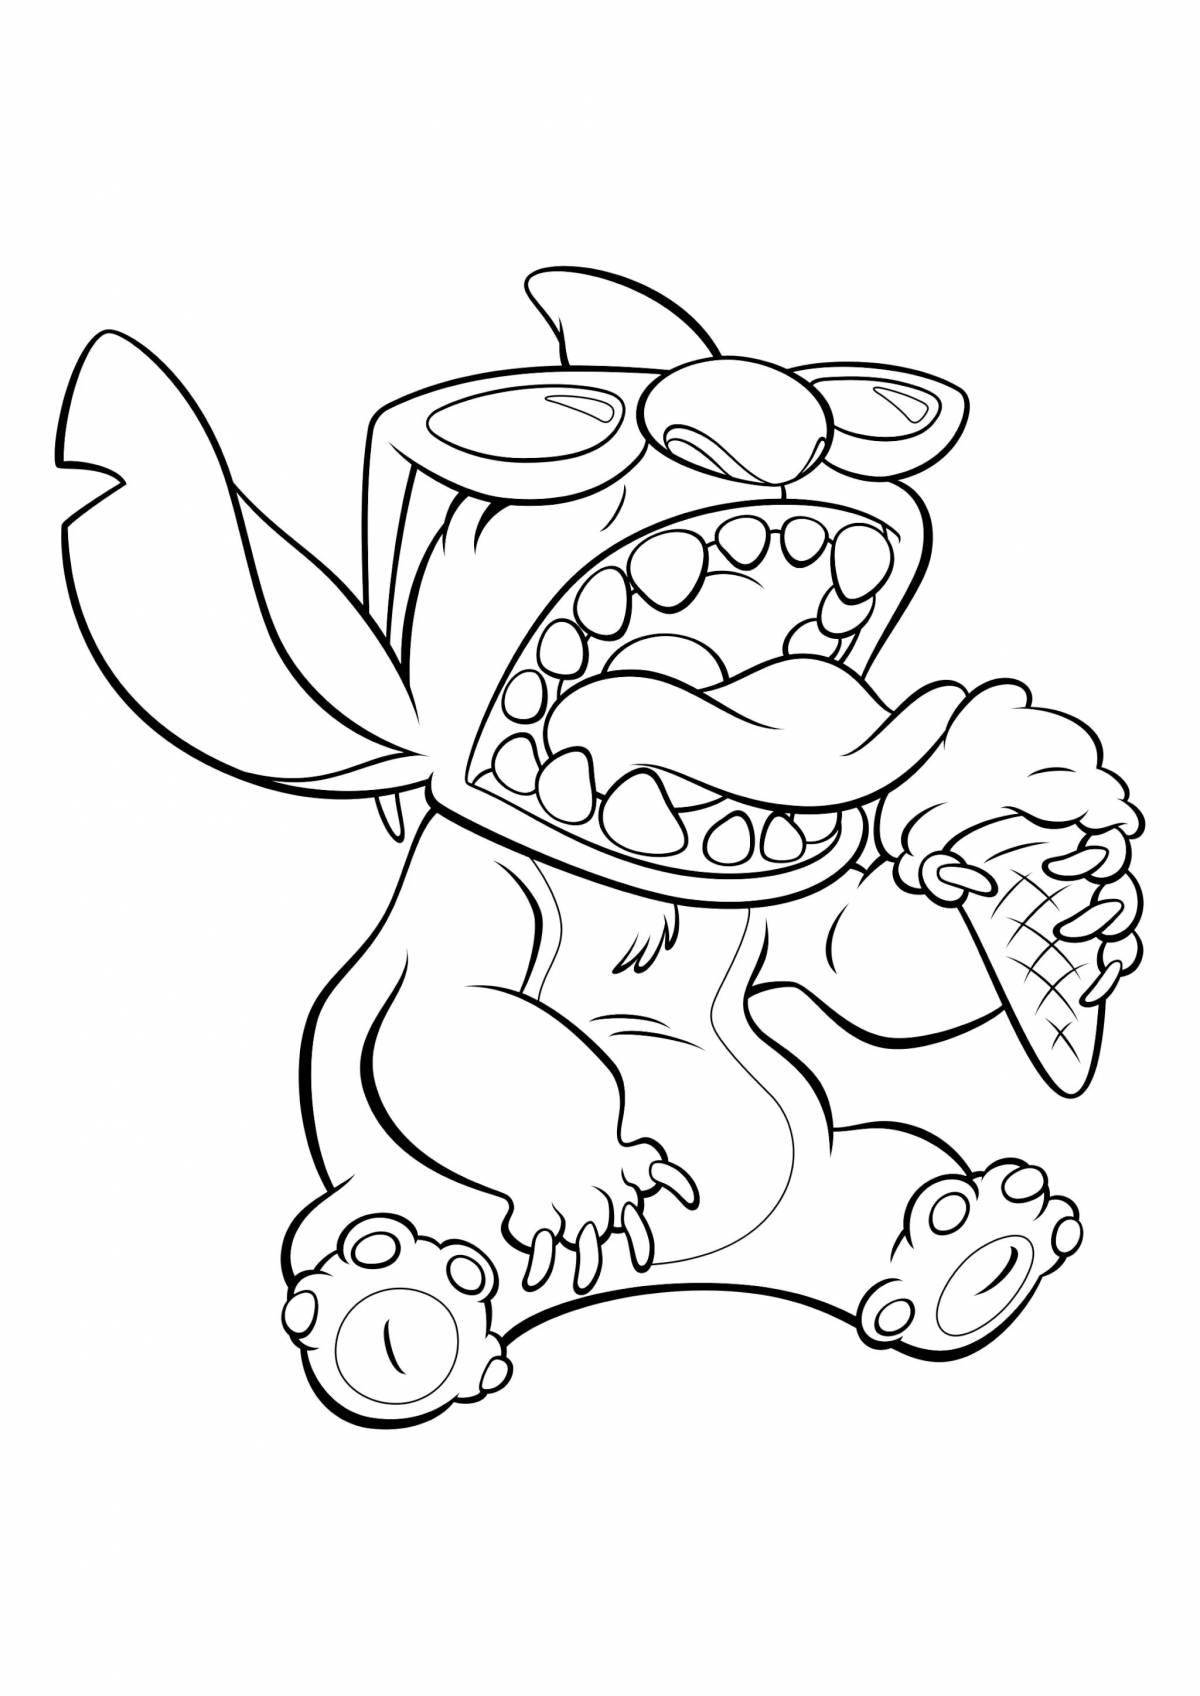 Playful animal coloring page